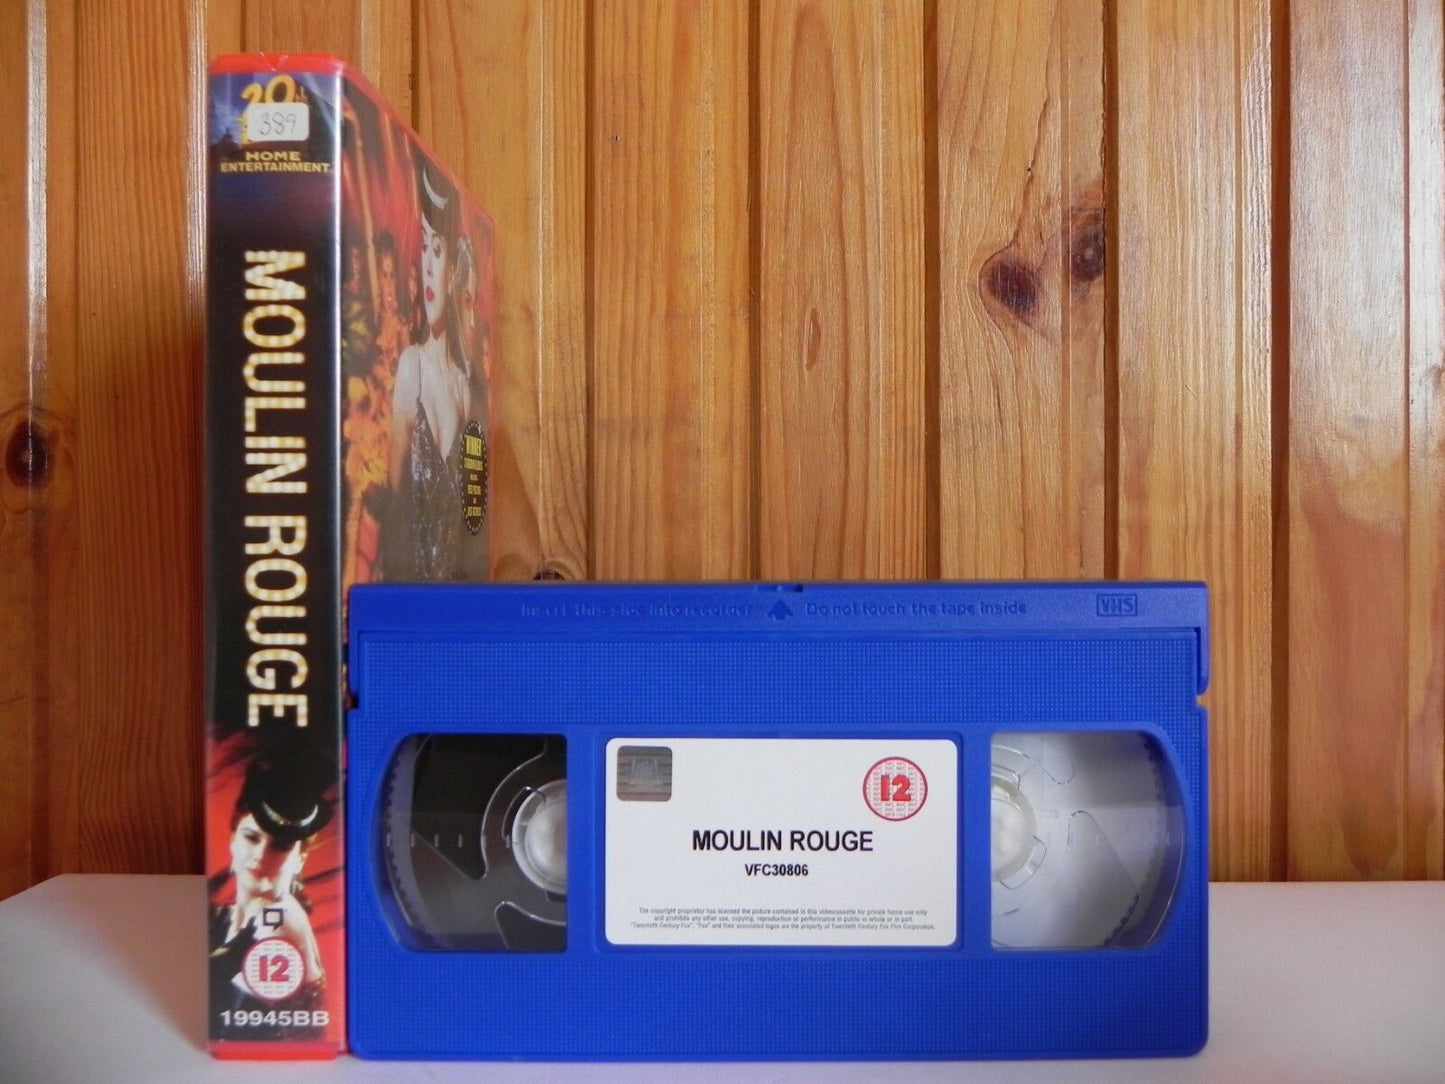 Moulin Rouge - 20th Century Fox - Musical - Ex-Rental - Large Box - Pal VHS-